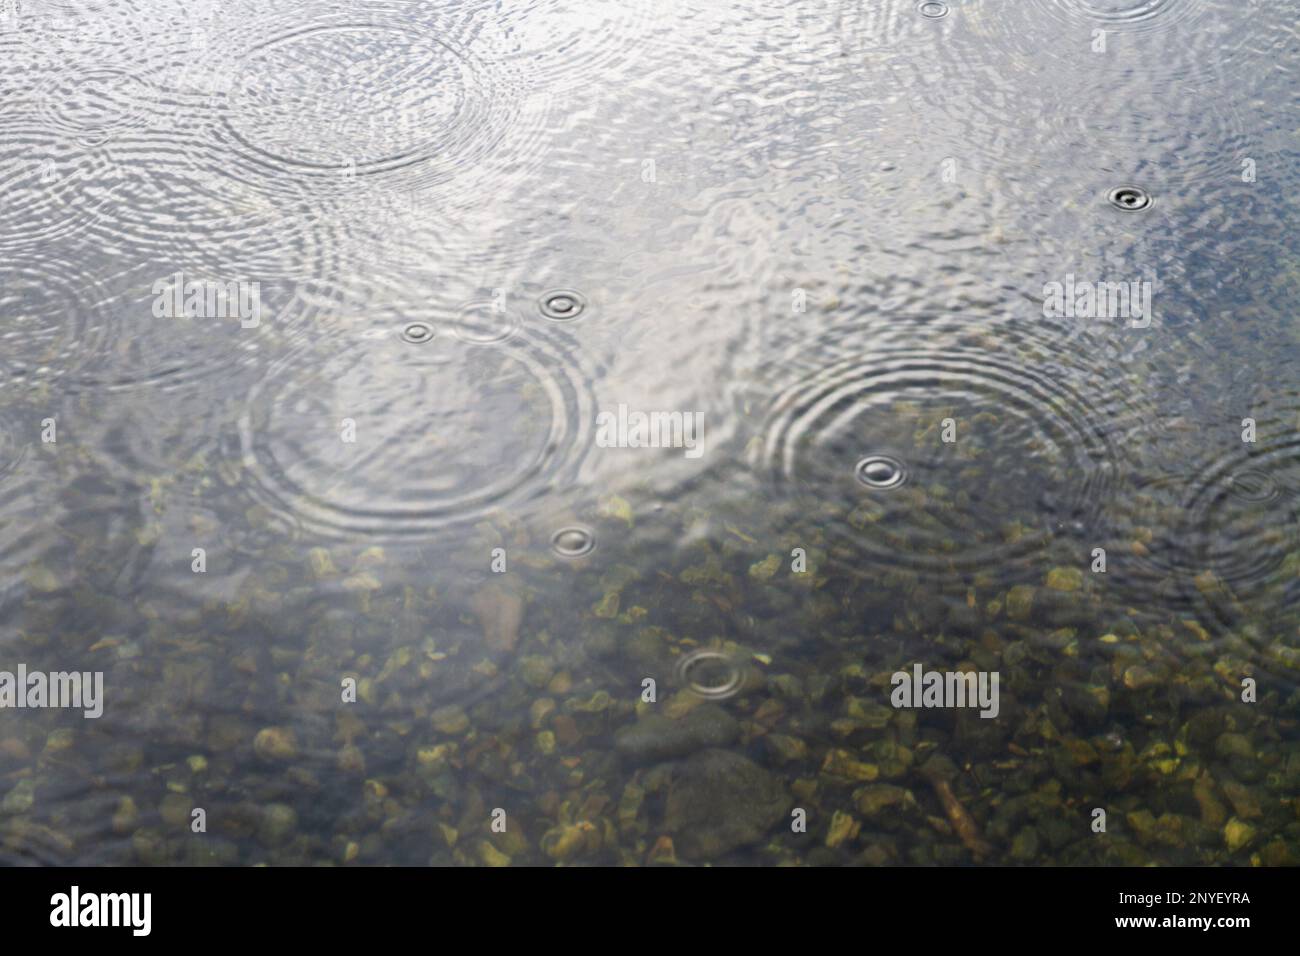 raindrops falling onto a the surface of a river. The riverbed can just be seen at the bottom of the image. Includes space for text Stock Photo